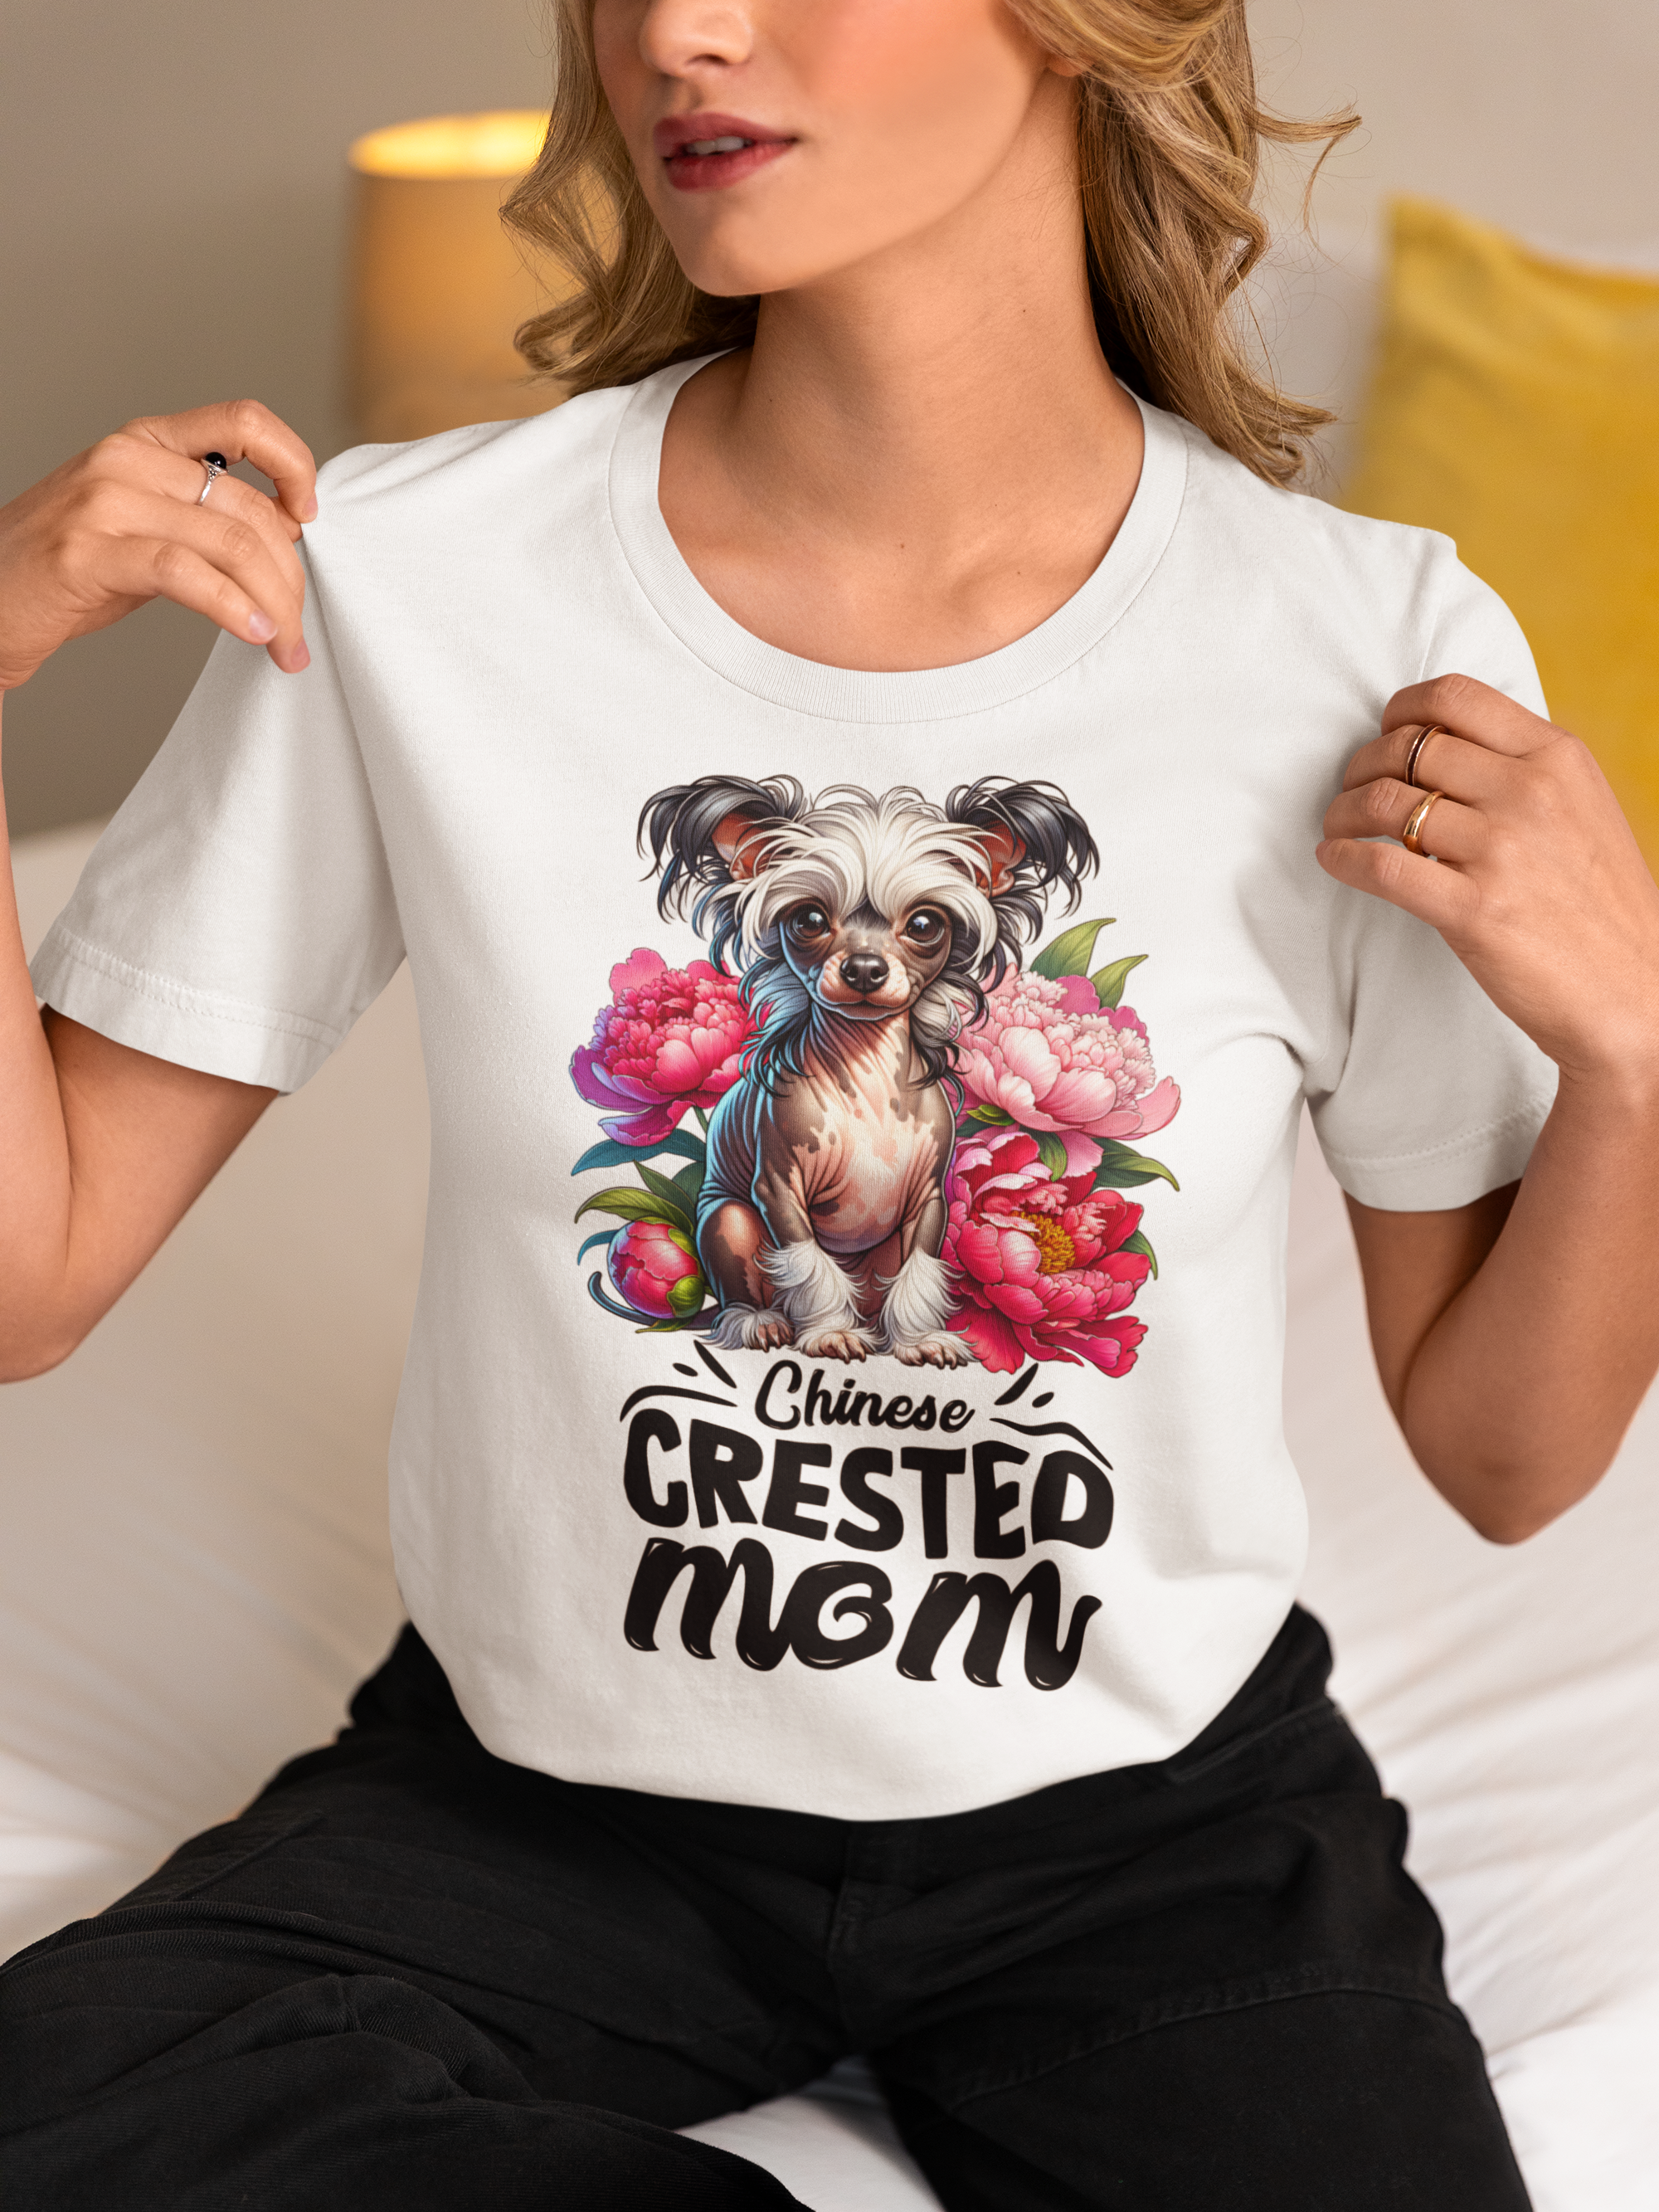 Chinese Crested Mom T-shirt